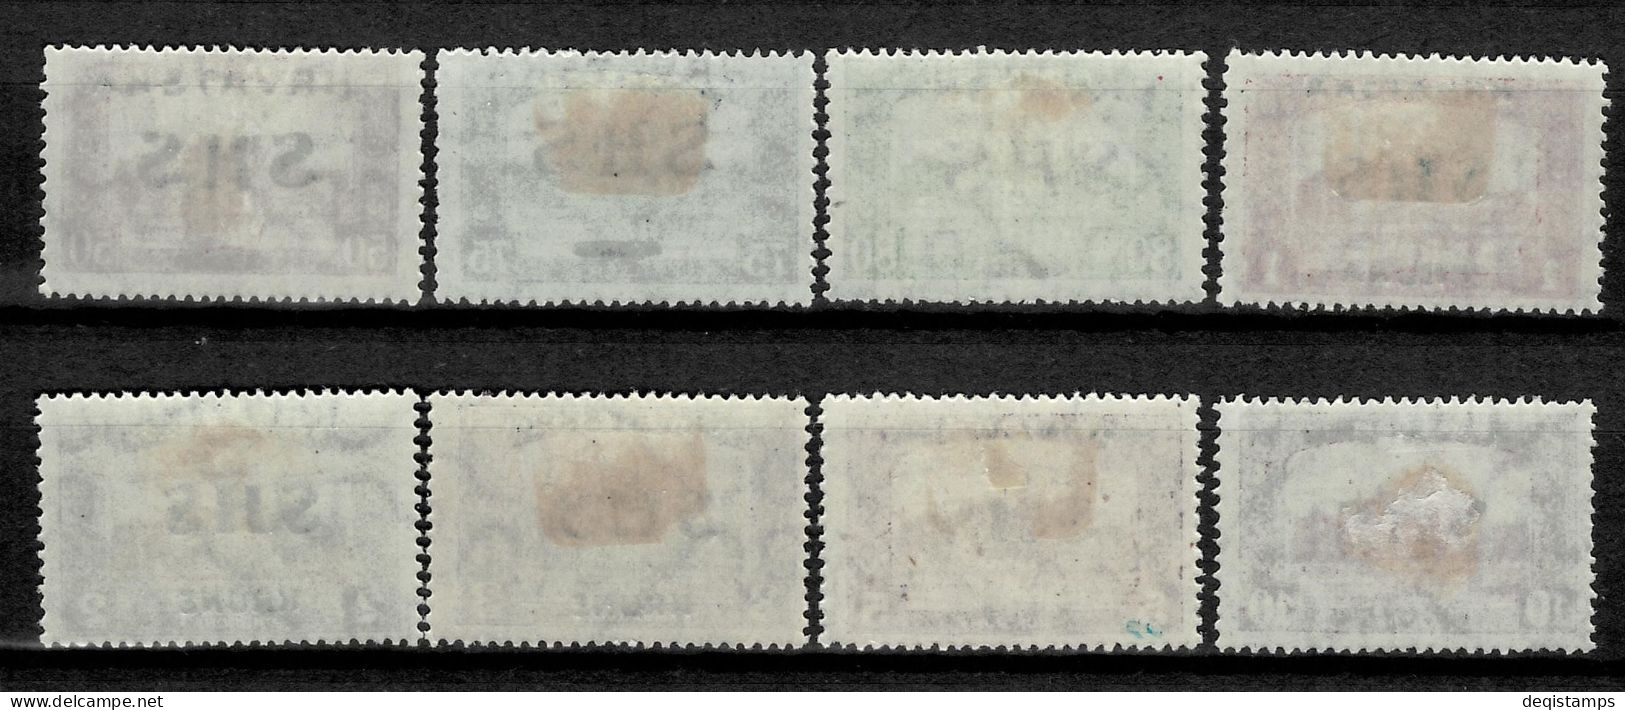 SHS - Croatia Stamps 1918 Parliament Set Hungary Postage MH Stamps Overprinted - Neufs